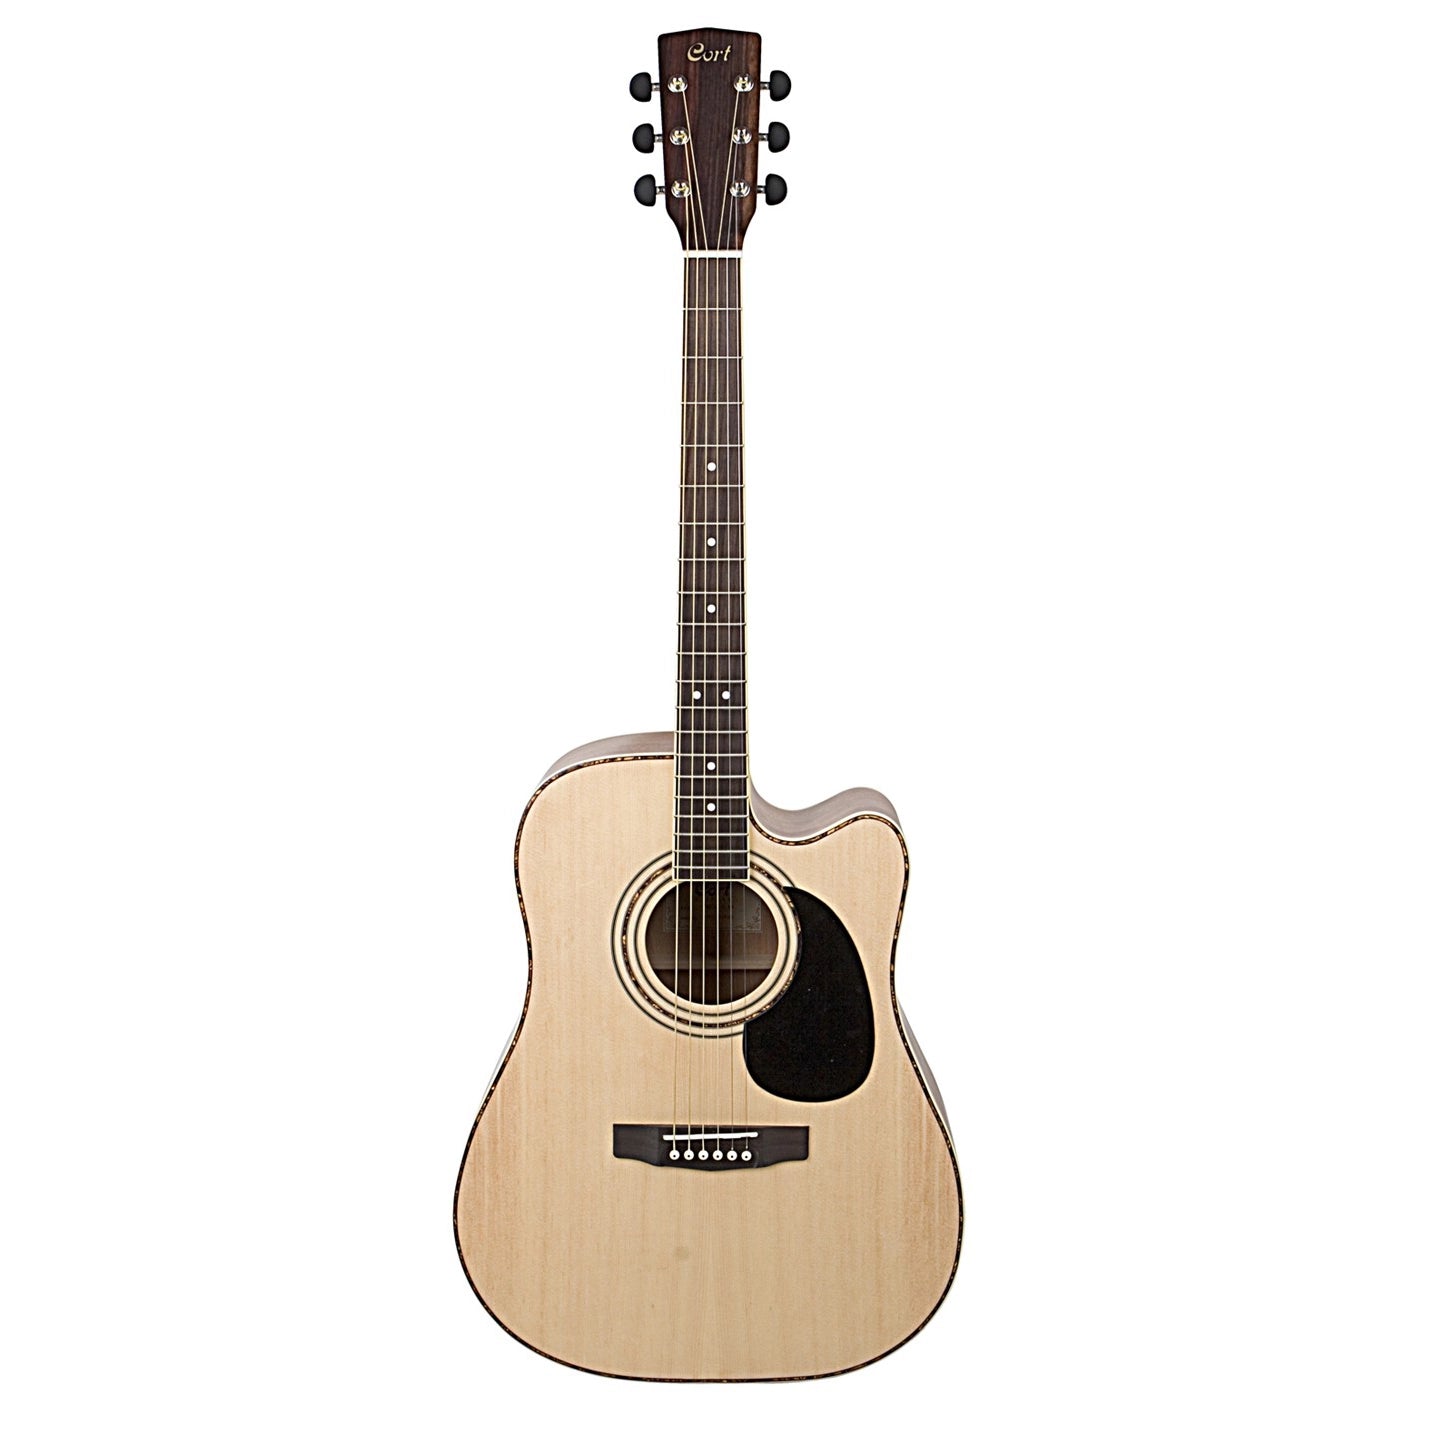 Cort AD880CE Standard Series Dreadnought Acoustic Electric Guitar - Satin